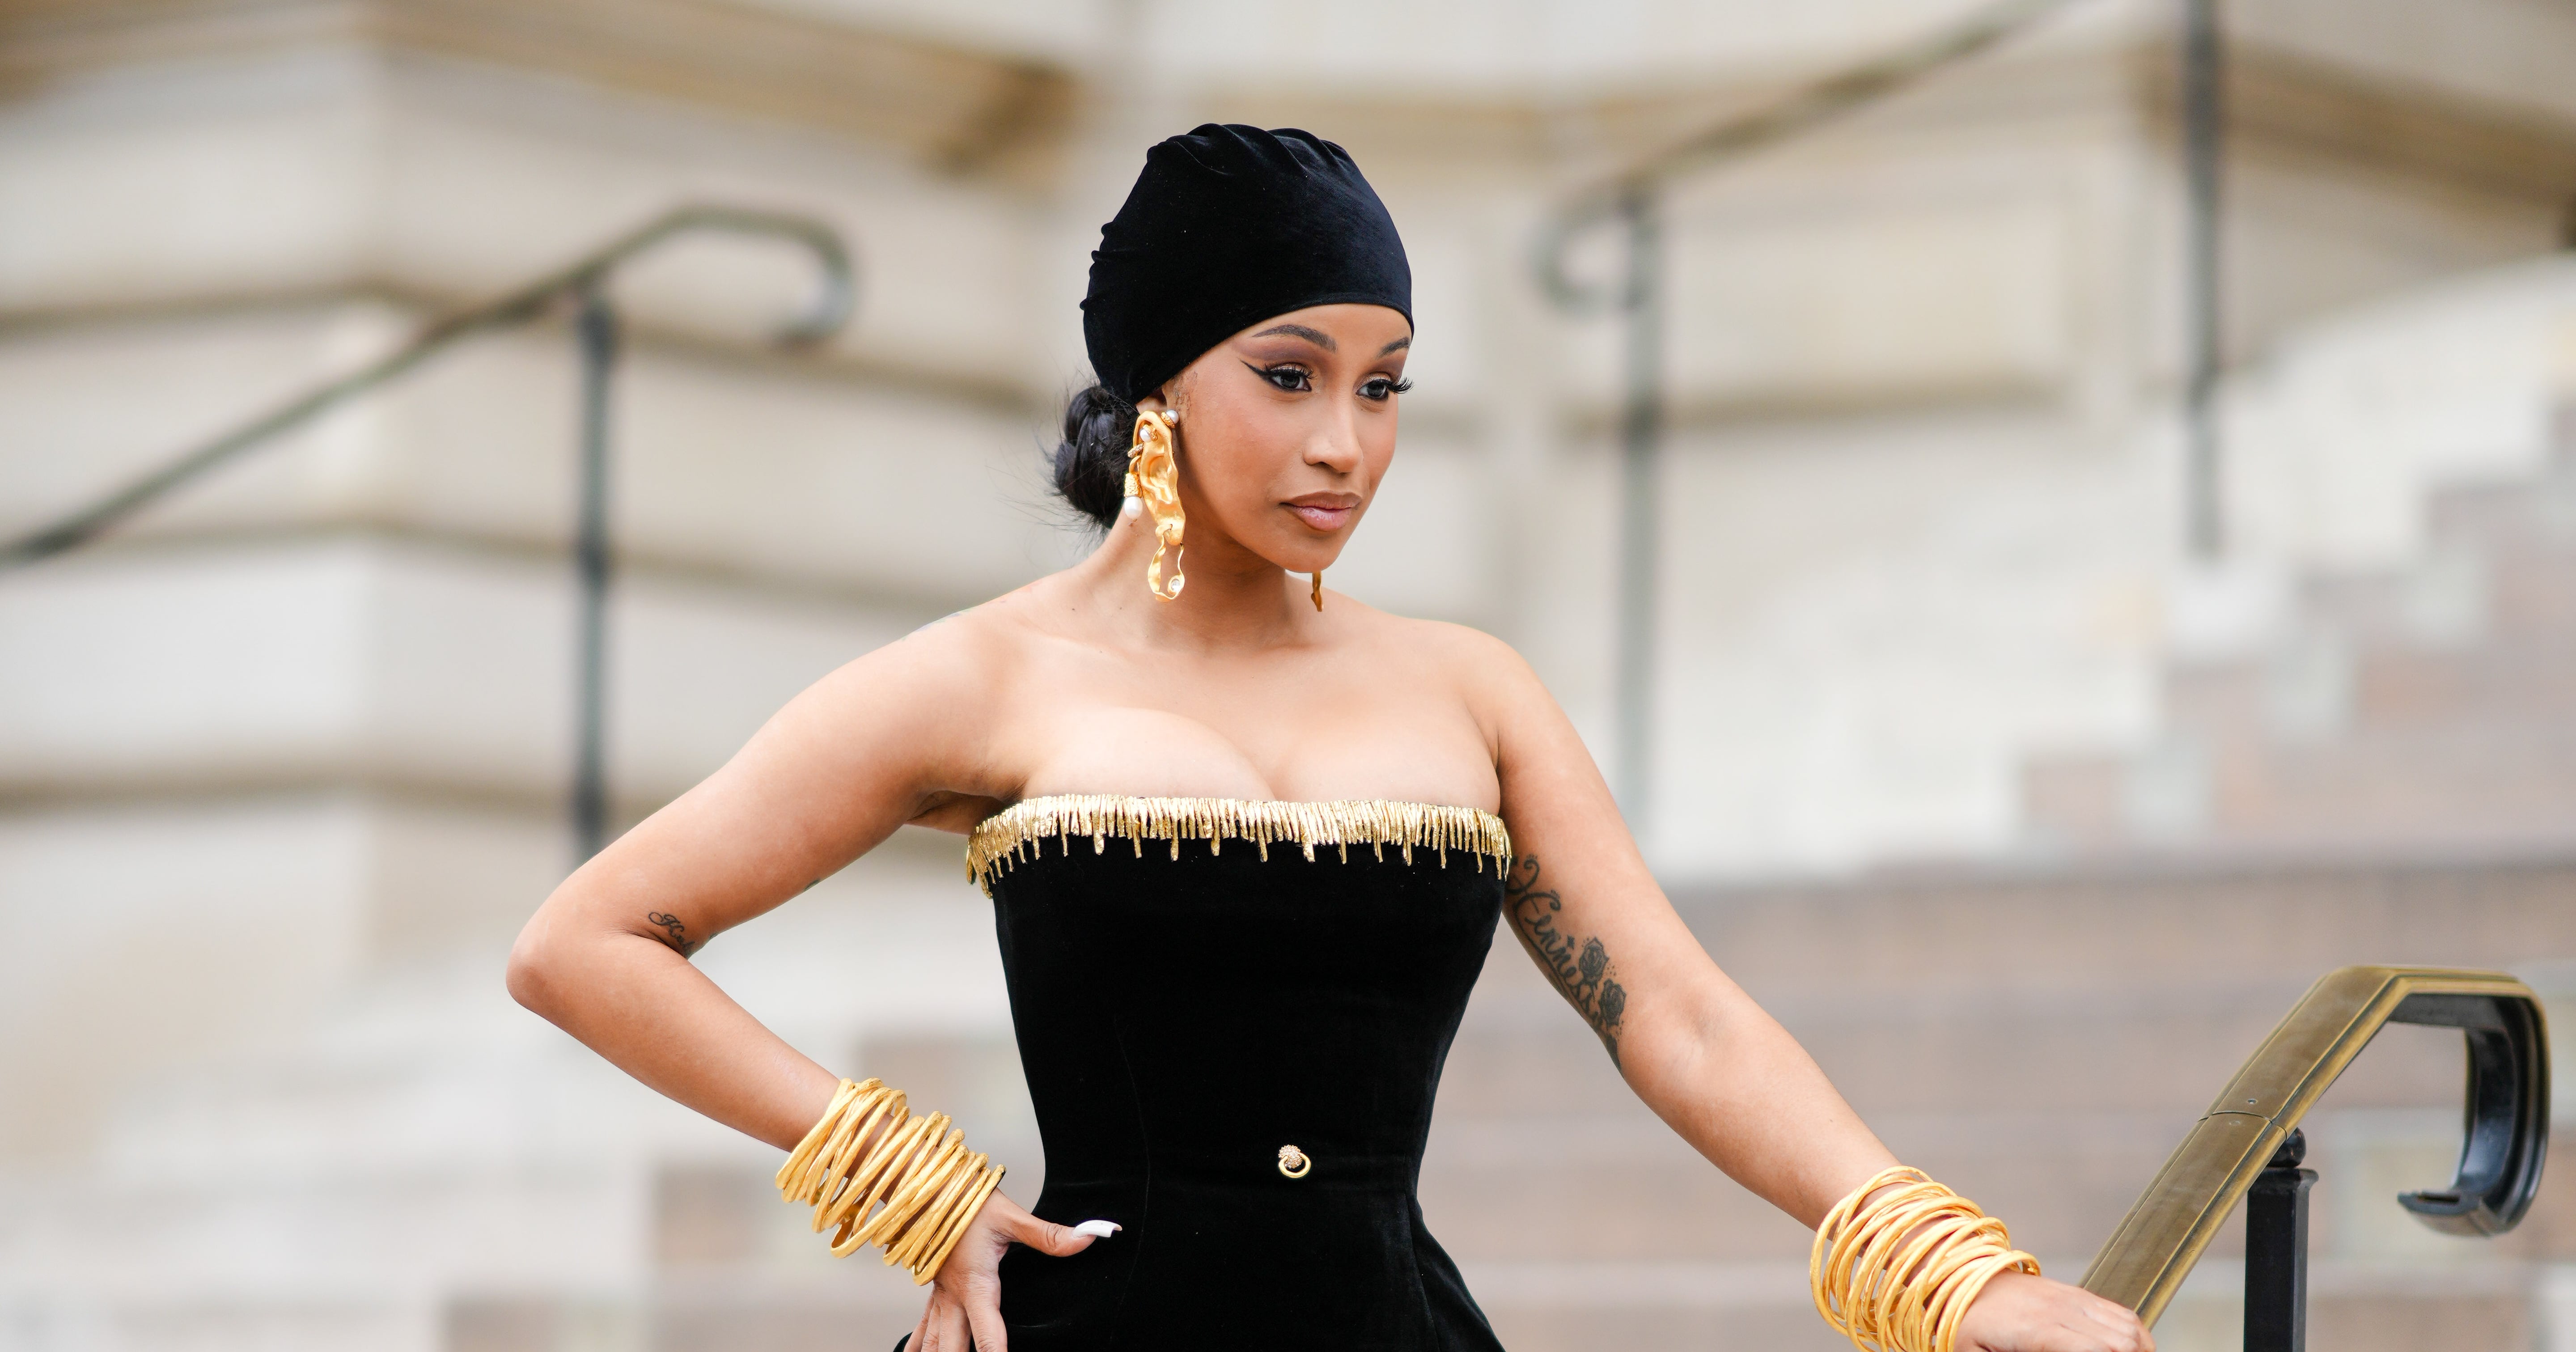 Cardi B Hurls Mic at Audience Member Who Threw Drink on Her During Show